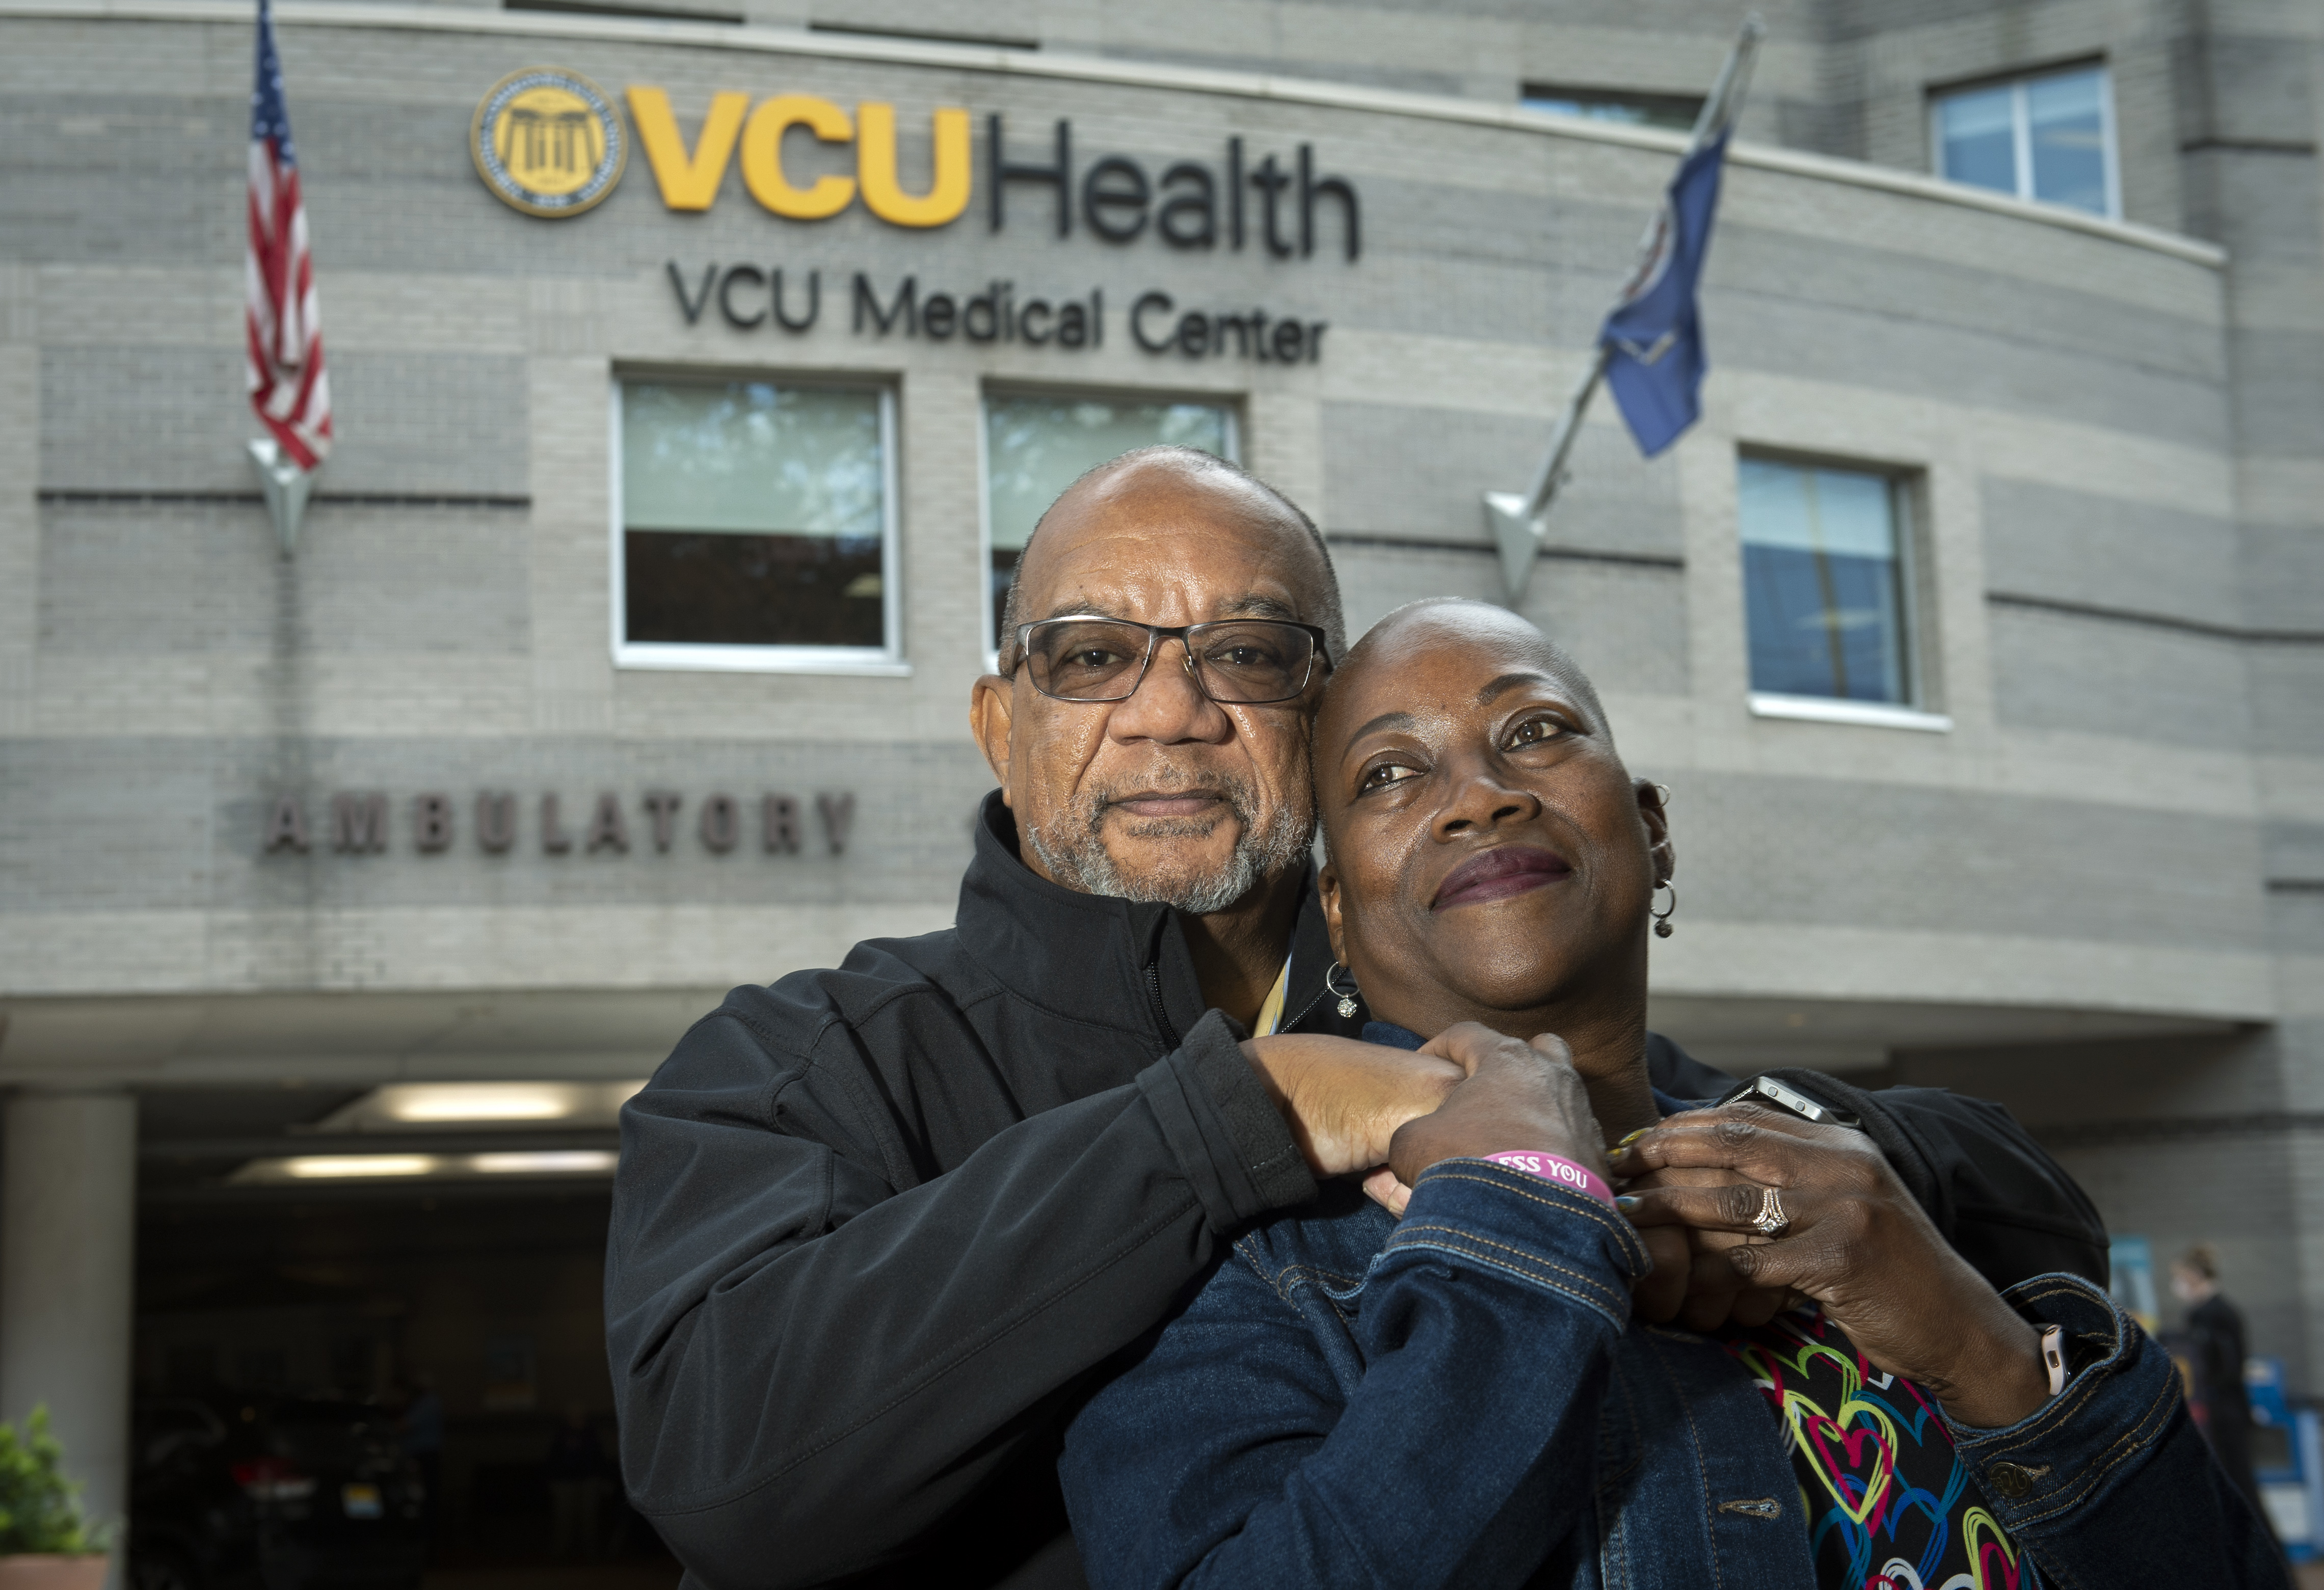 Husband and wife in front of VCU Health Medical Center